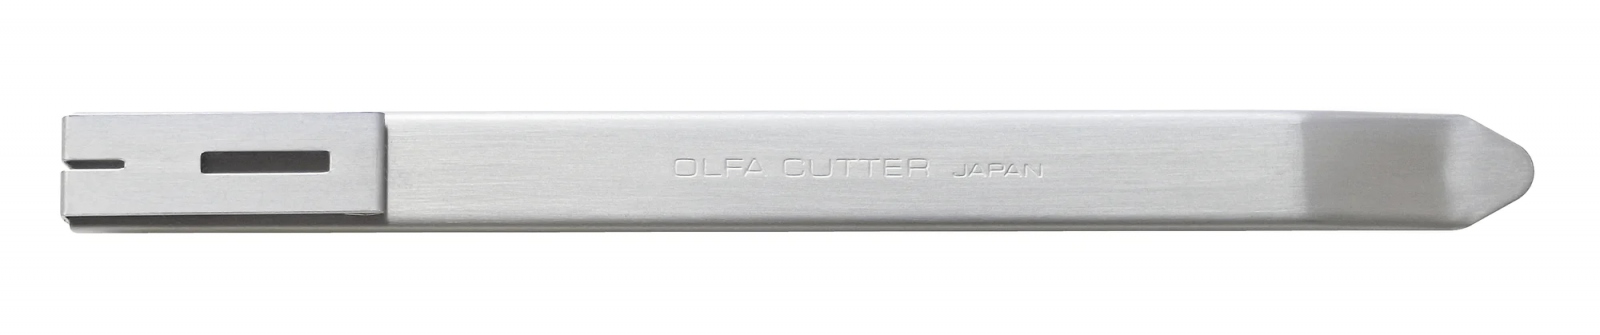 pics/OLFA/olfa-sac-1-graphics-knife-cutter-with-precision-9mm-snap-off-blade-stainless-steel-back.jpg